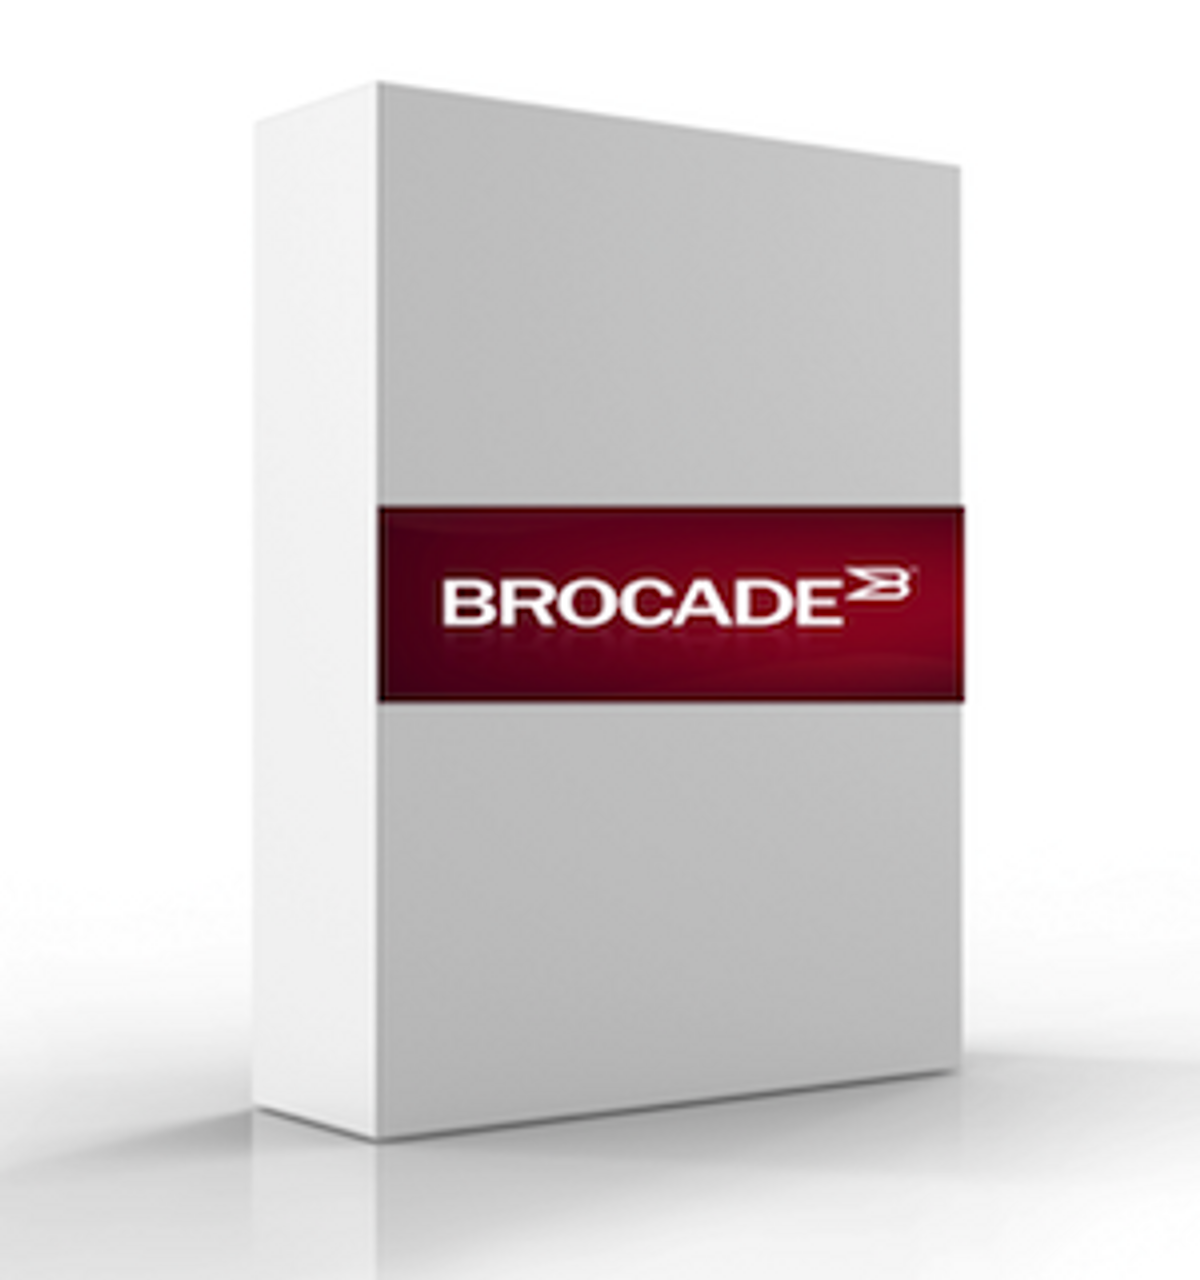 BR-MIDRIR-01 - BROCADE Integrated Routing LICENSE